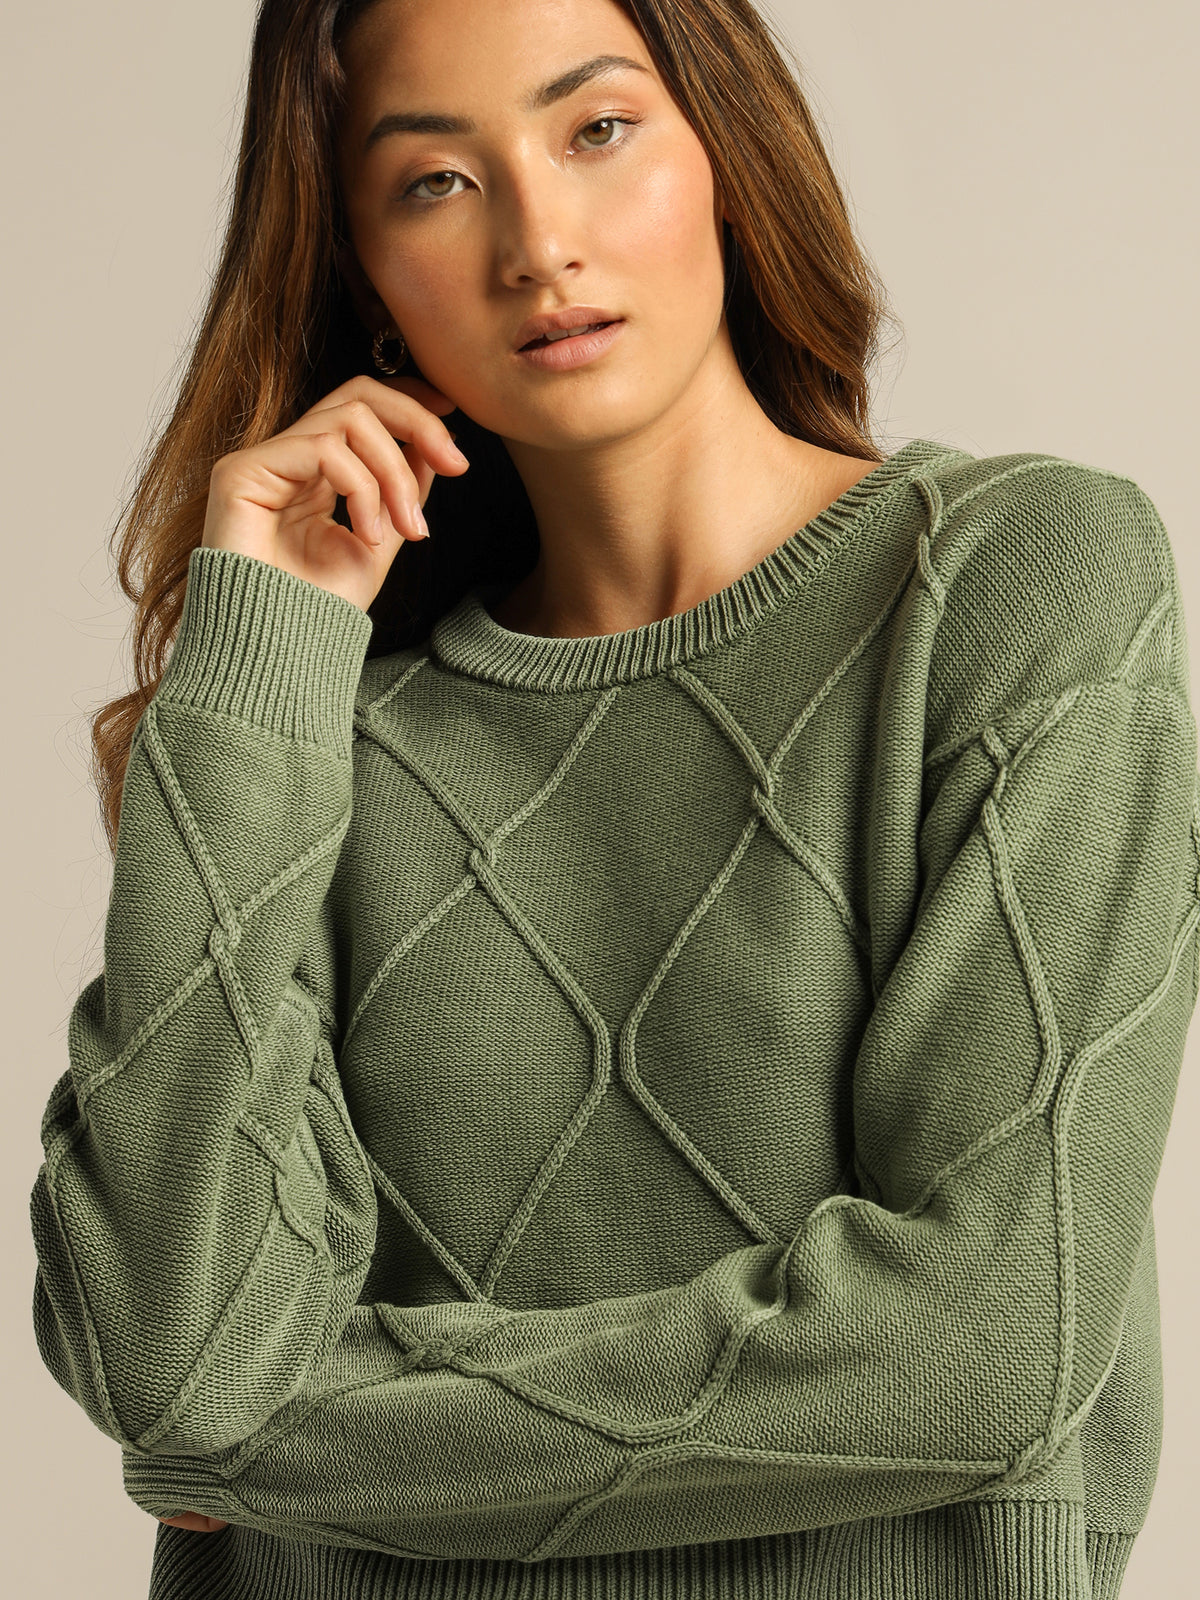 Shanti Acid Cable Knit in Washed Olive